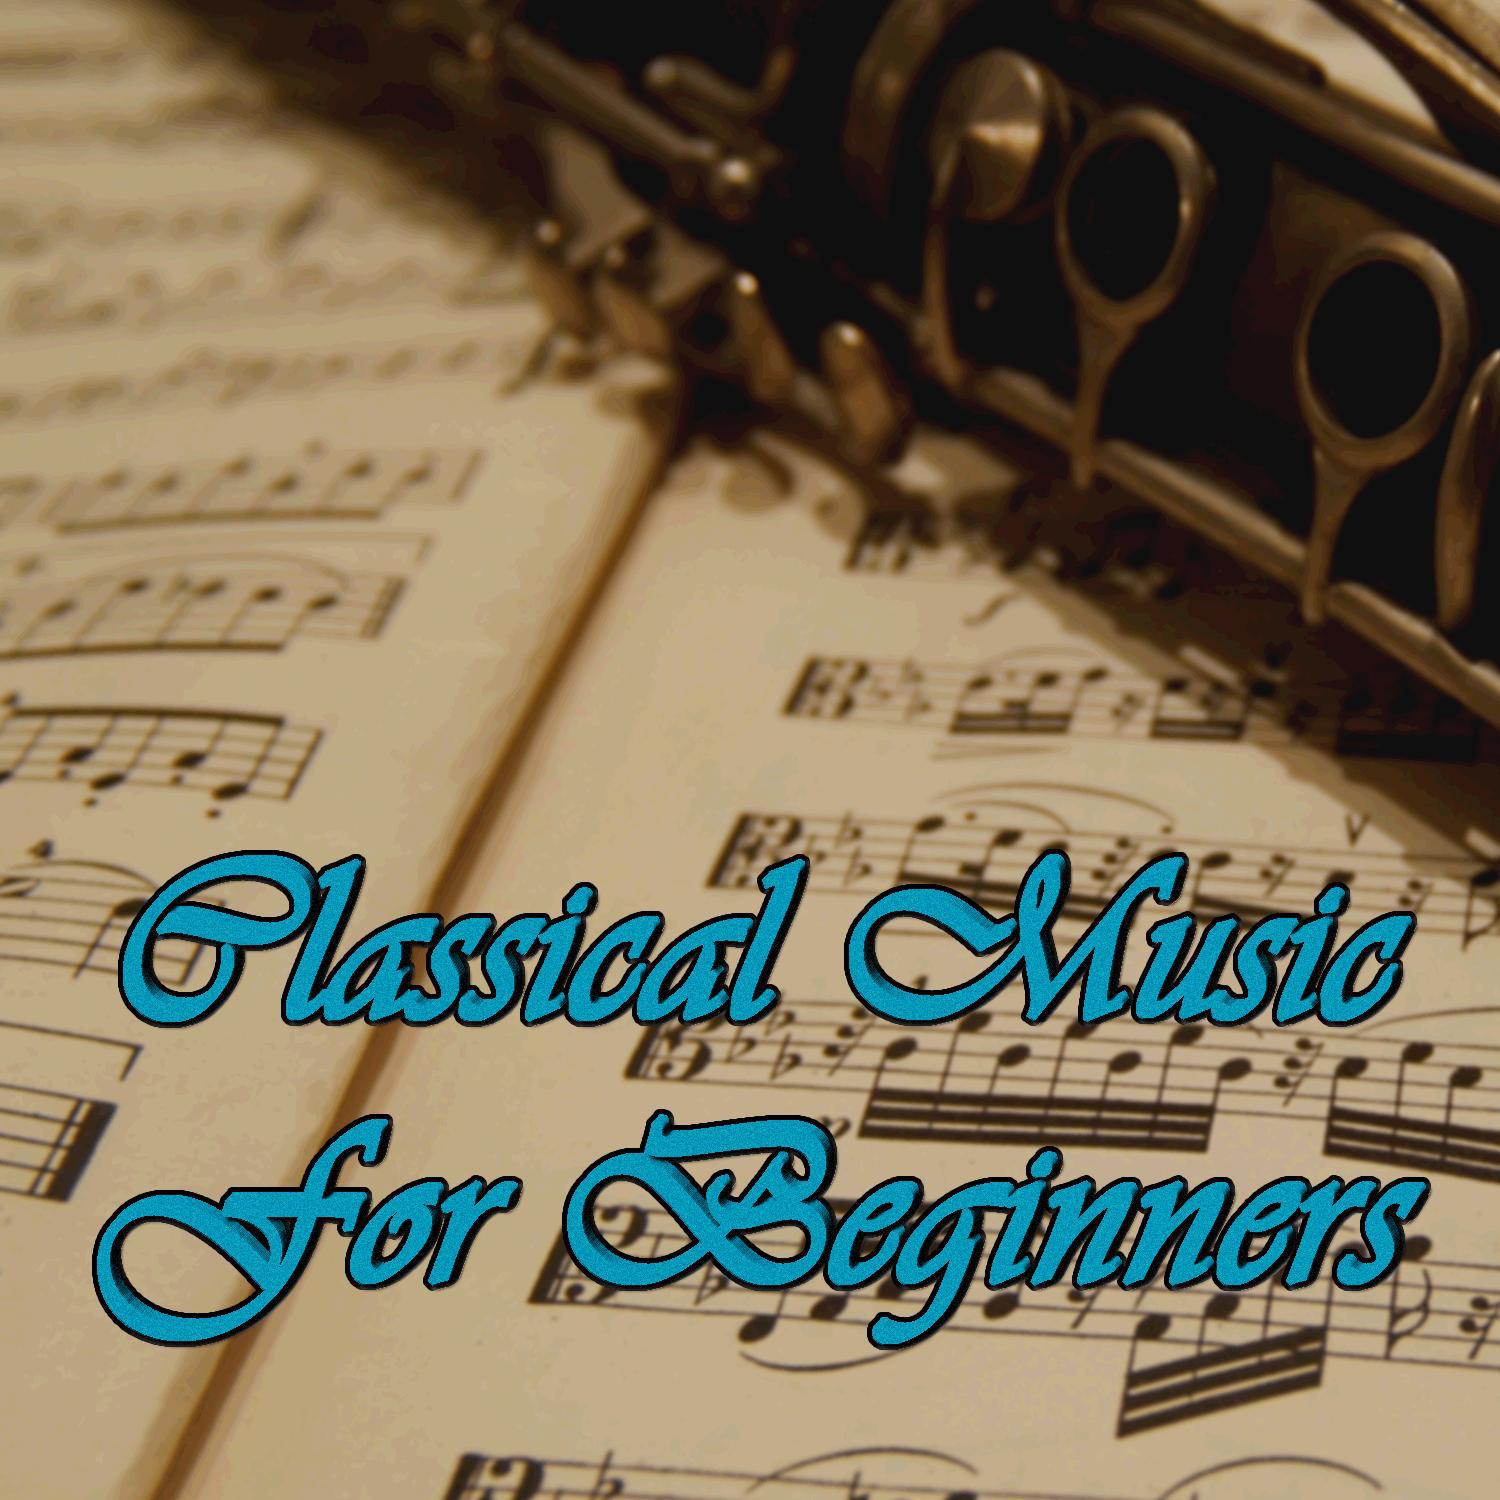 Classical Music for Beginners